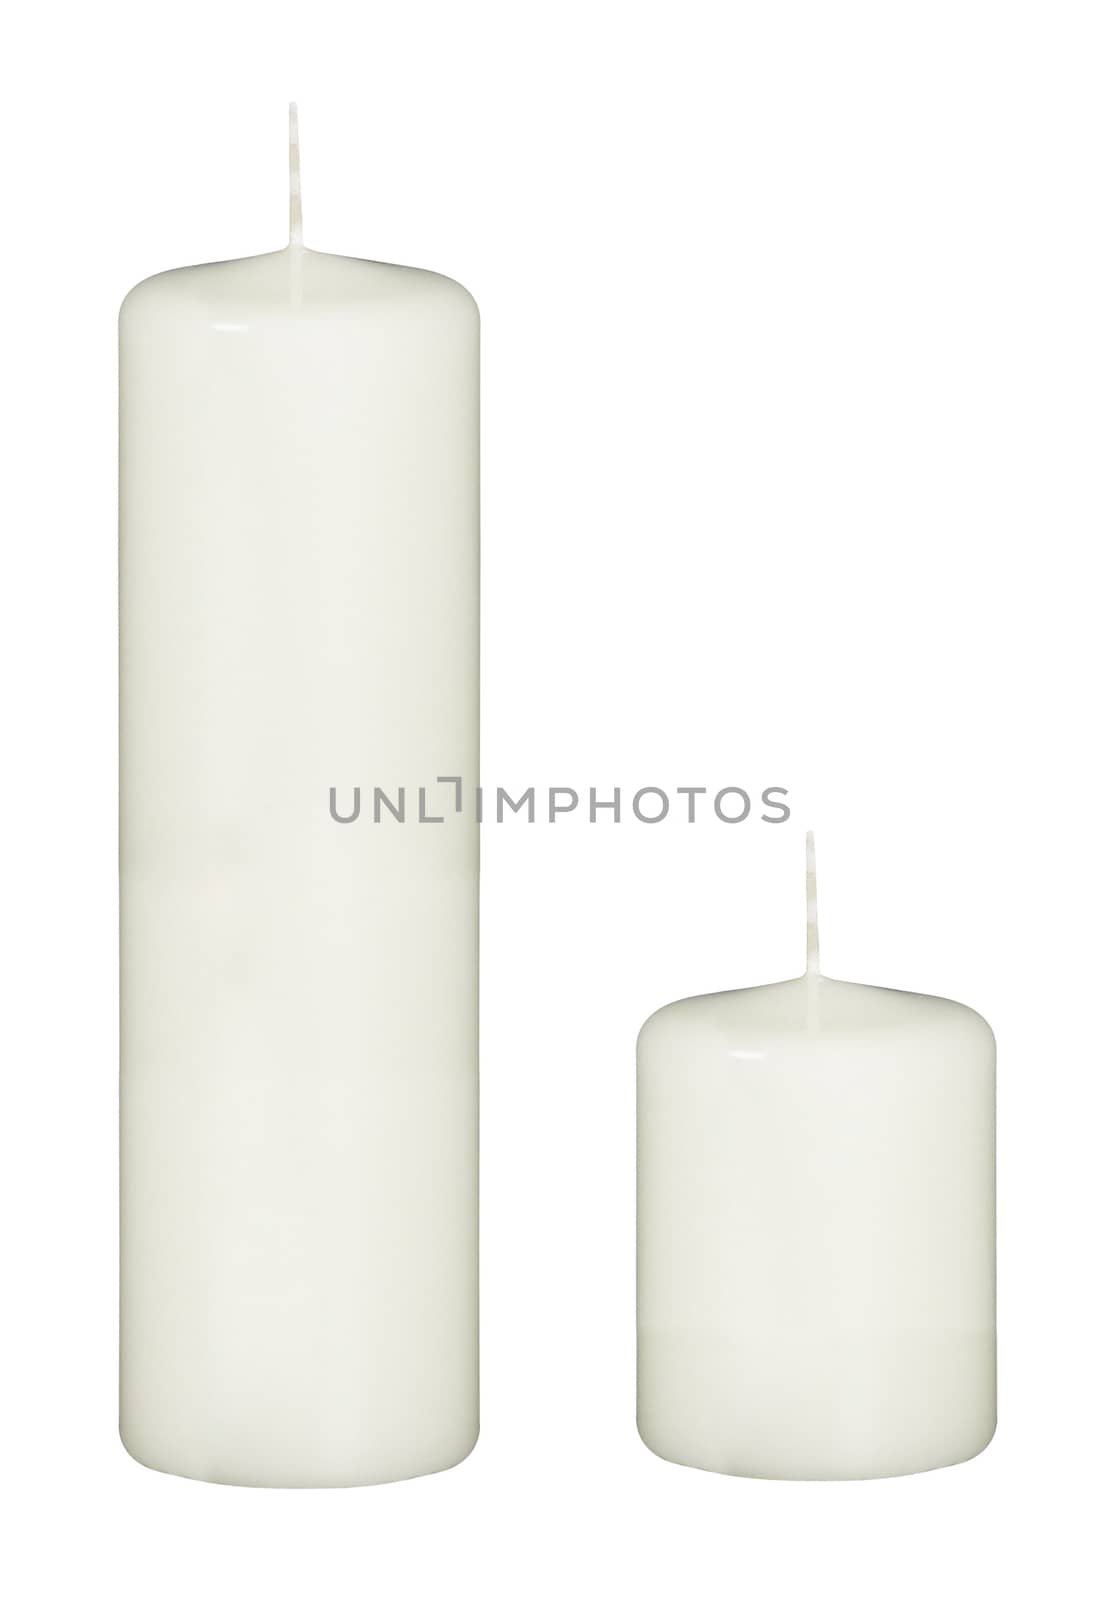 big and small candles isolated by ozaiachin